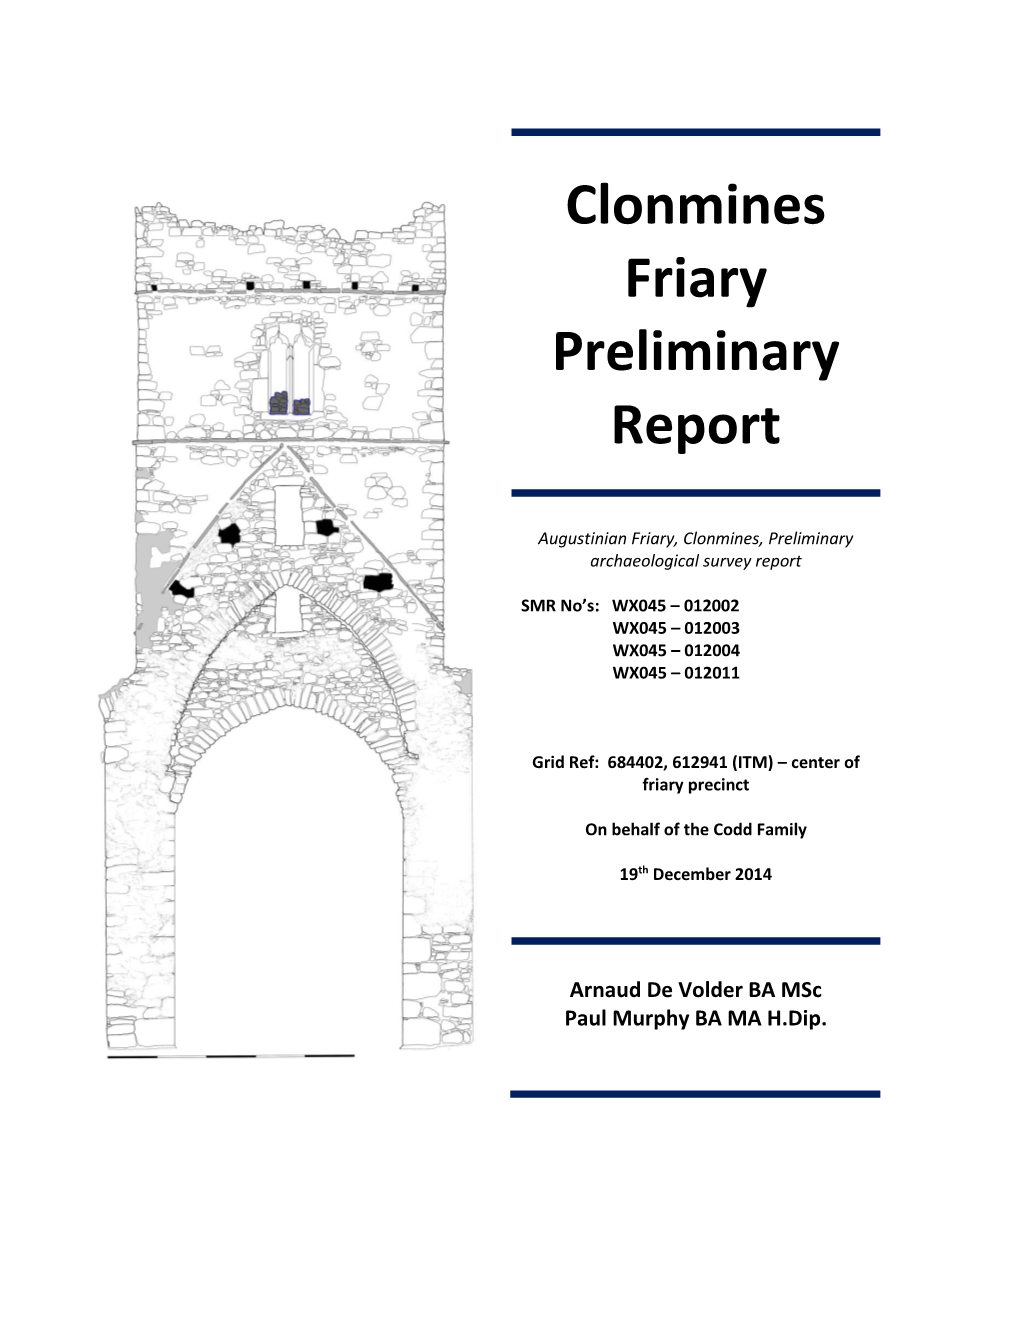 Clonmines Friary Preliminary Report